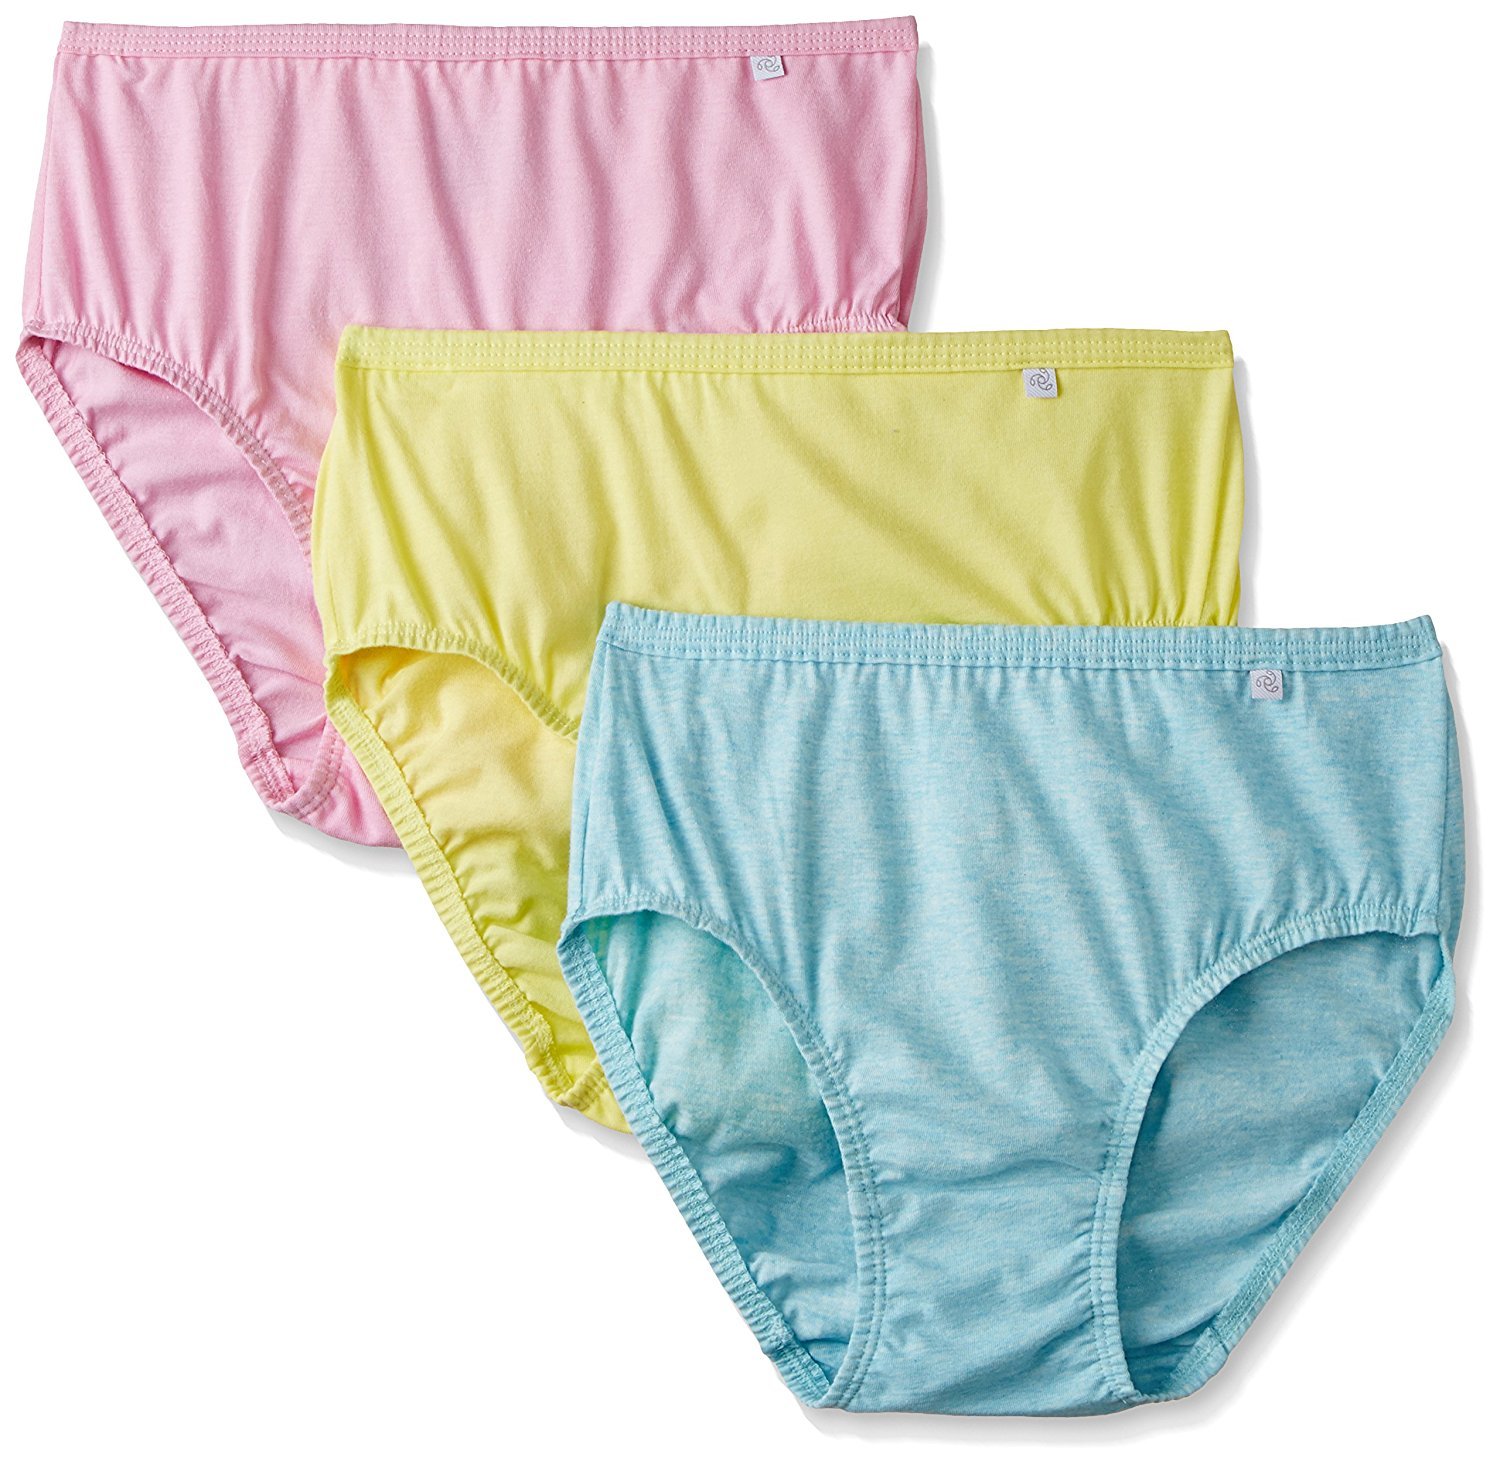 Buy JOCKEY Women's Cotton Hipster Brief(Assorted Pack Of 3